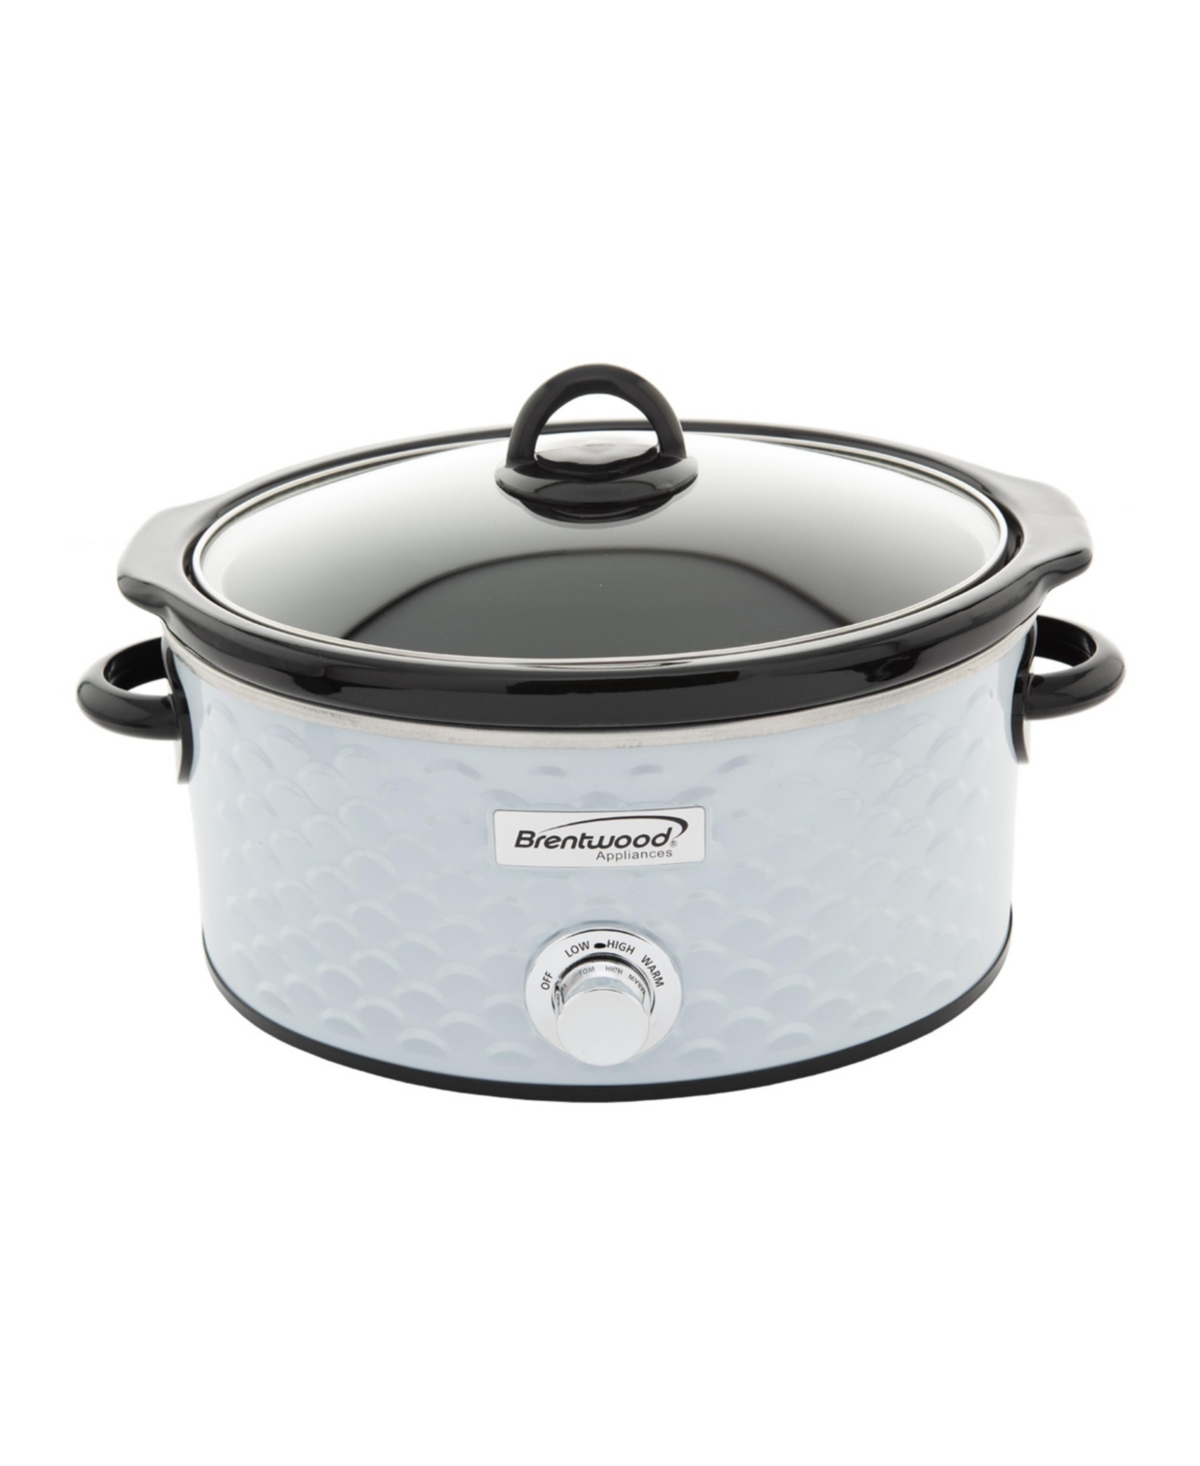 Brentwood 3.5 Quart Diamond Pattern Electric Slow Cooker - White